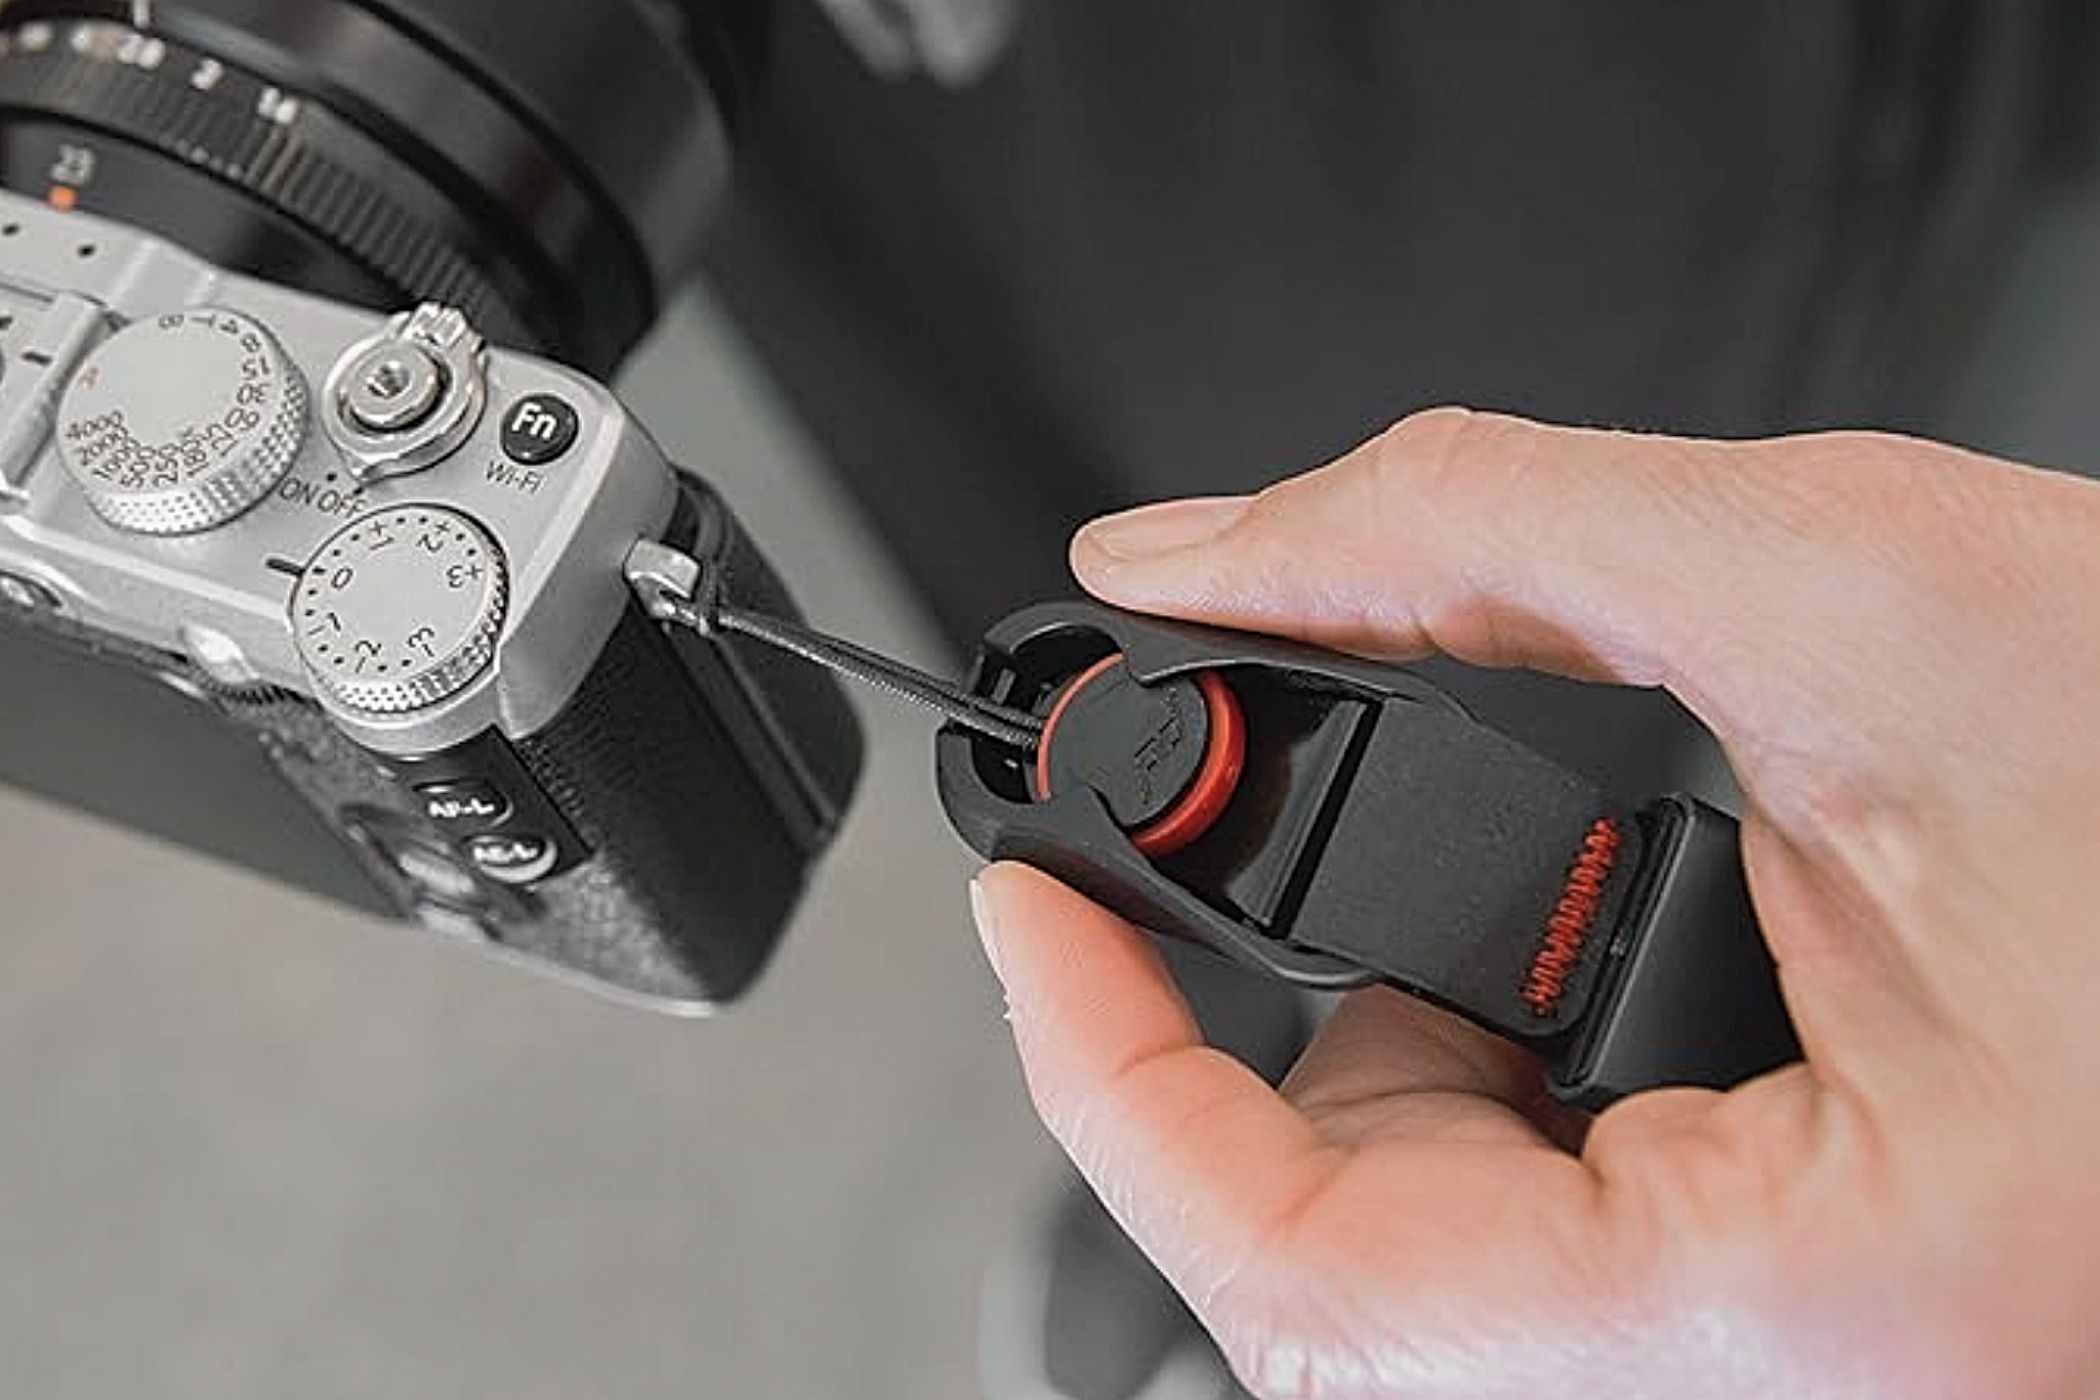 The anchor threaded to a camera and attached to the Peak Design Cuff Camera Wrist Strap